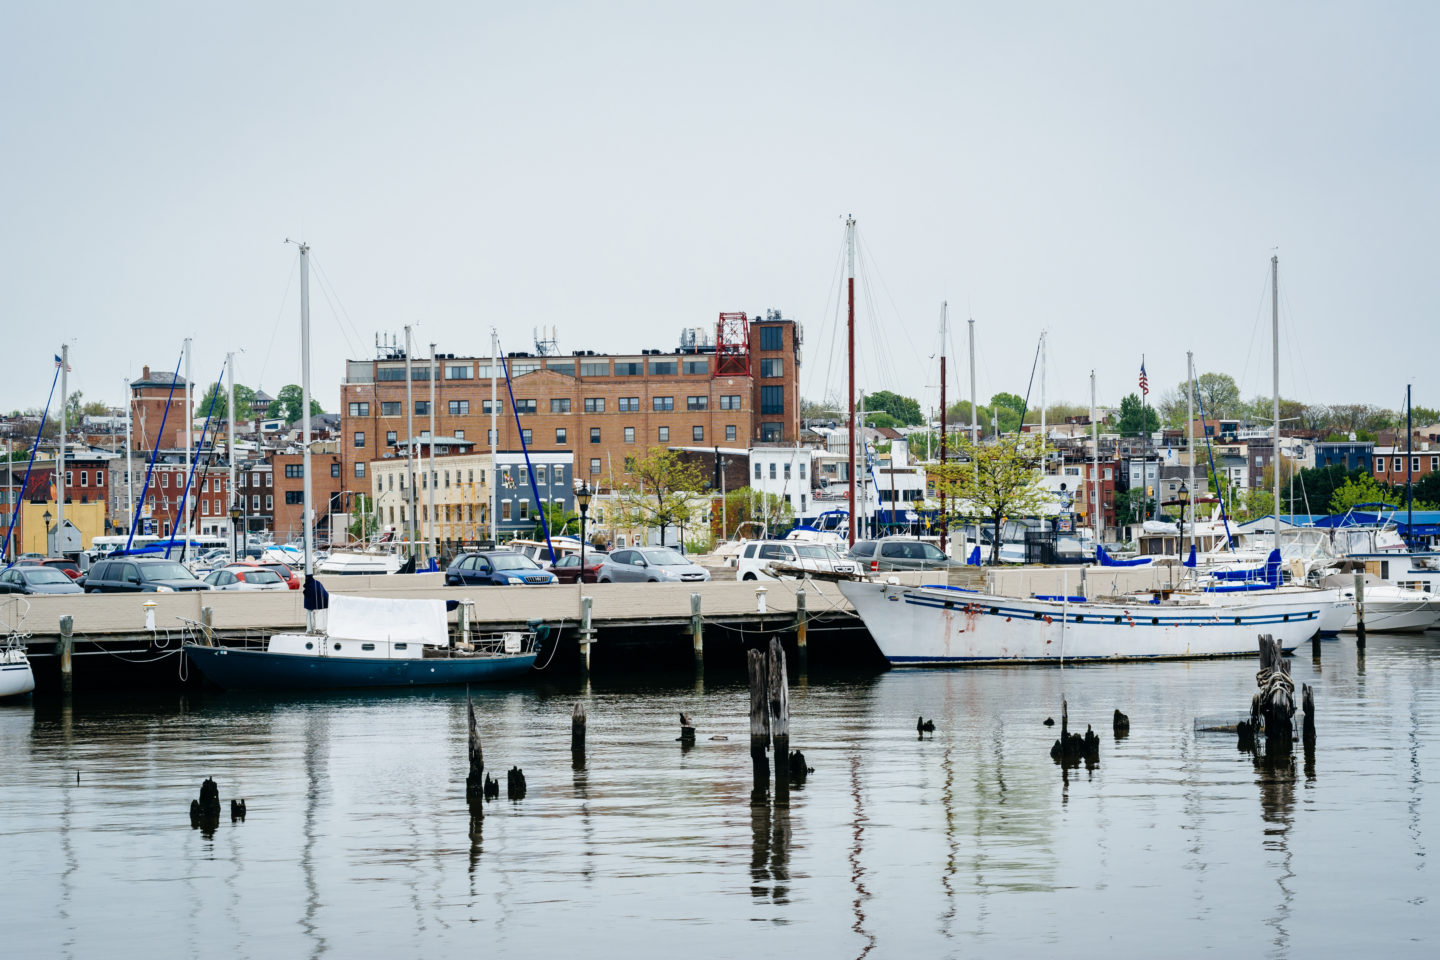 Boats and buildings on the waterfront in Fells Point, Baltimore,